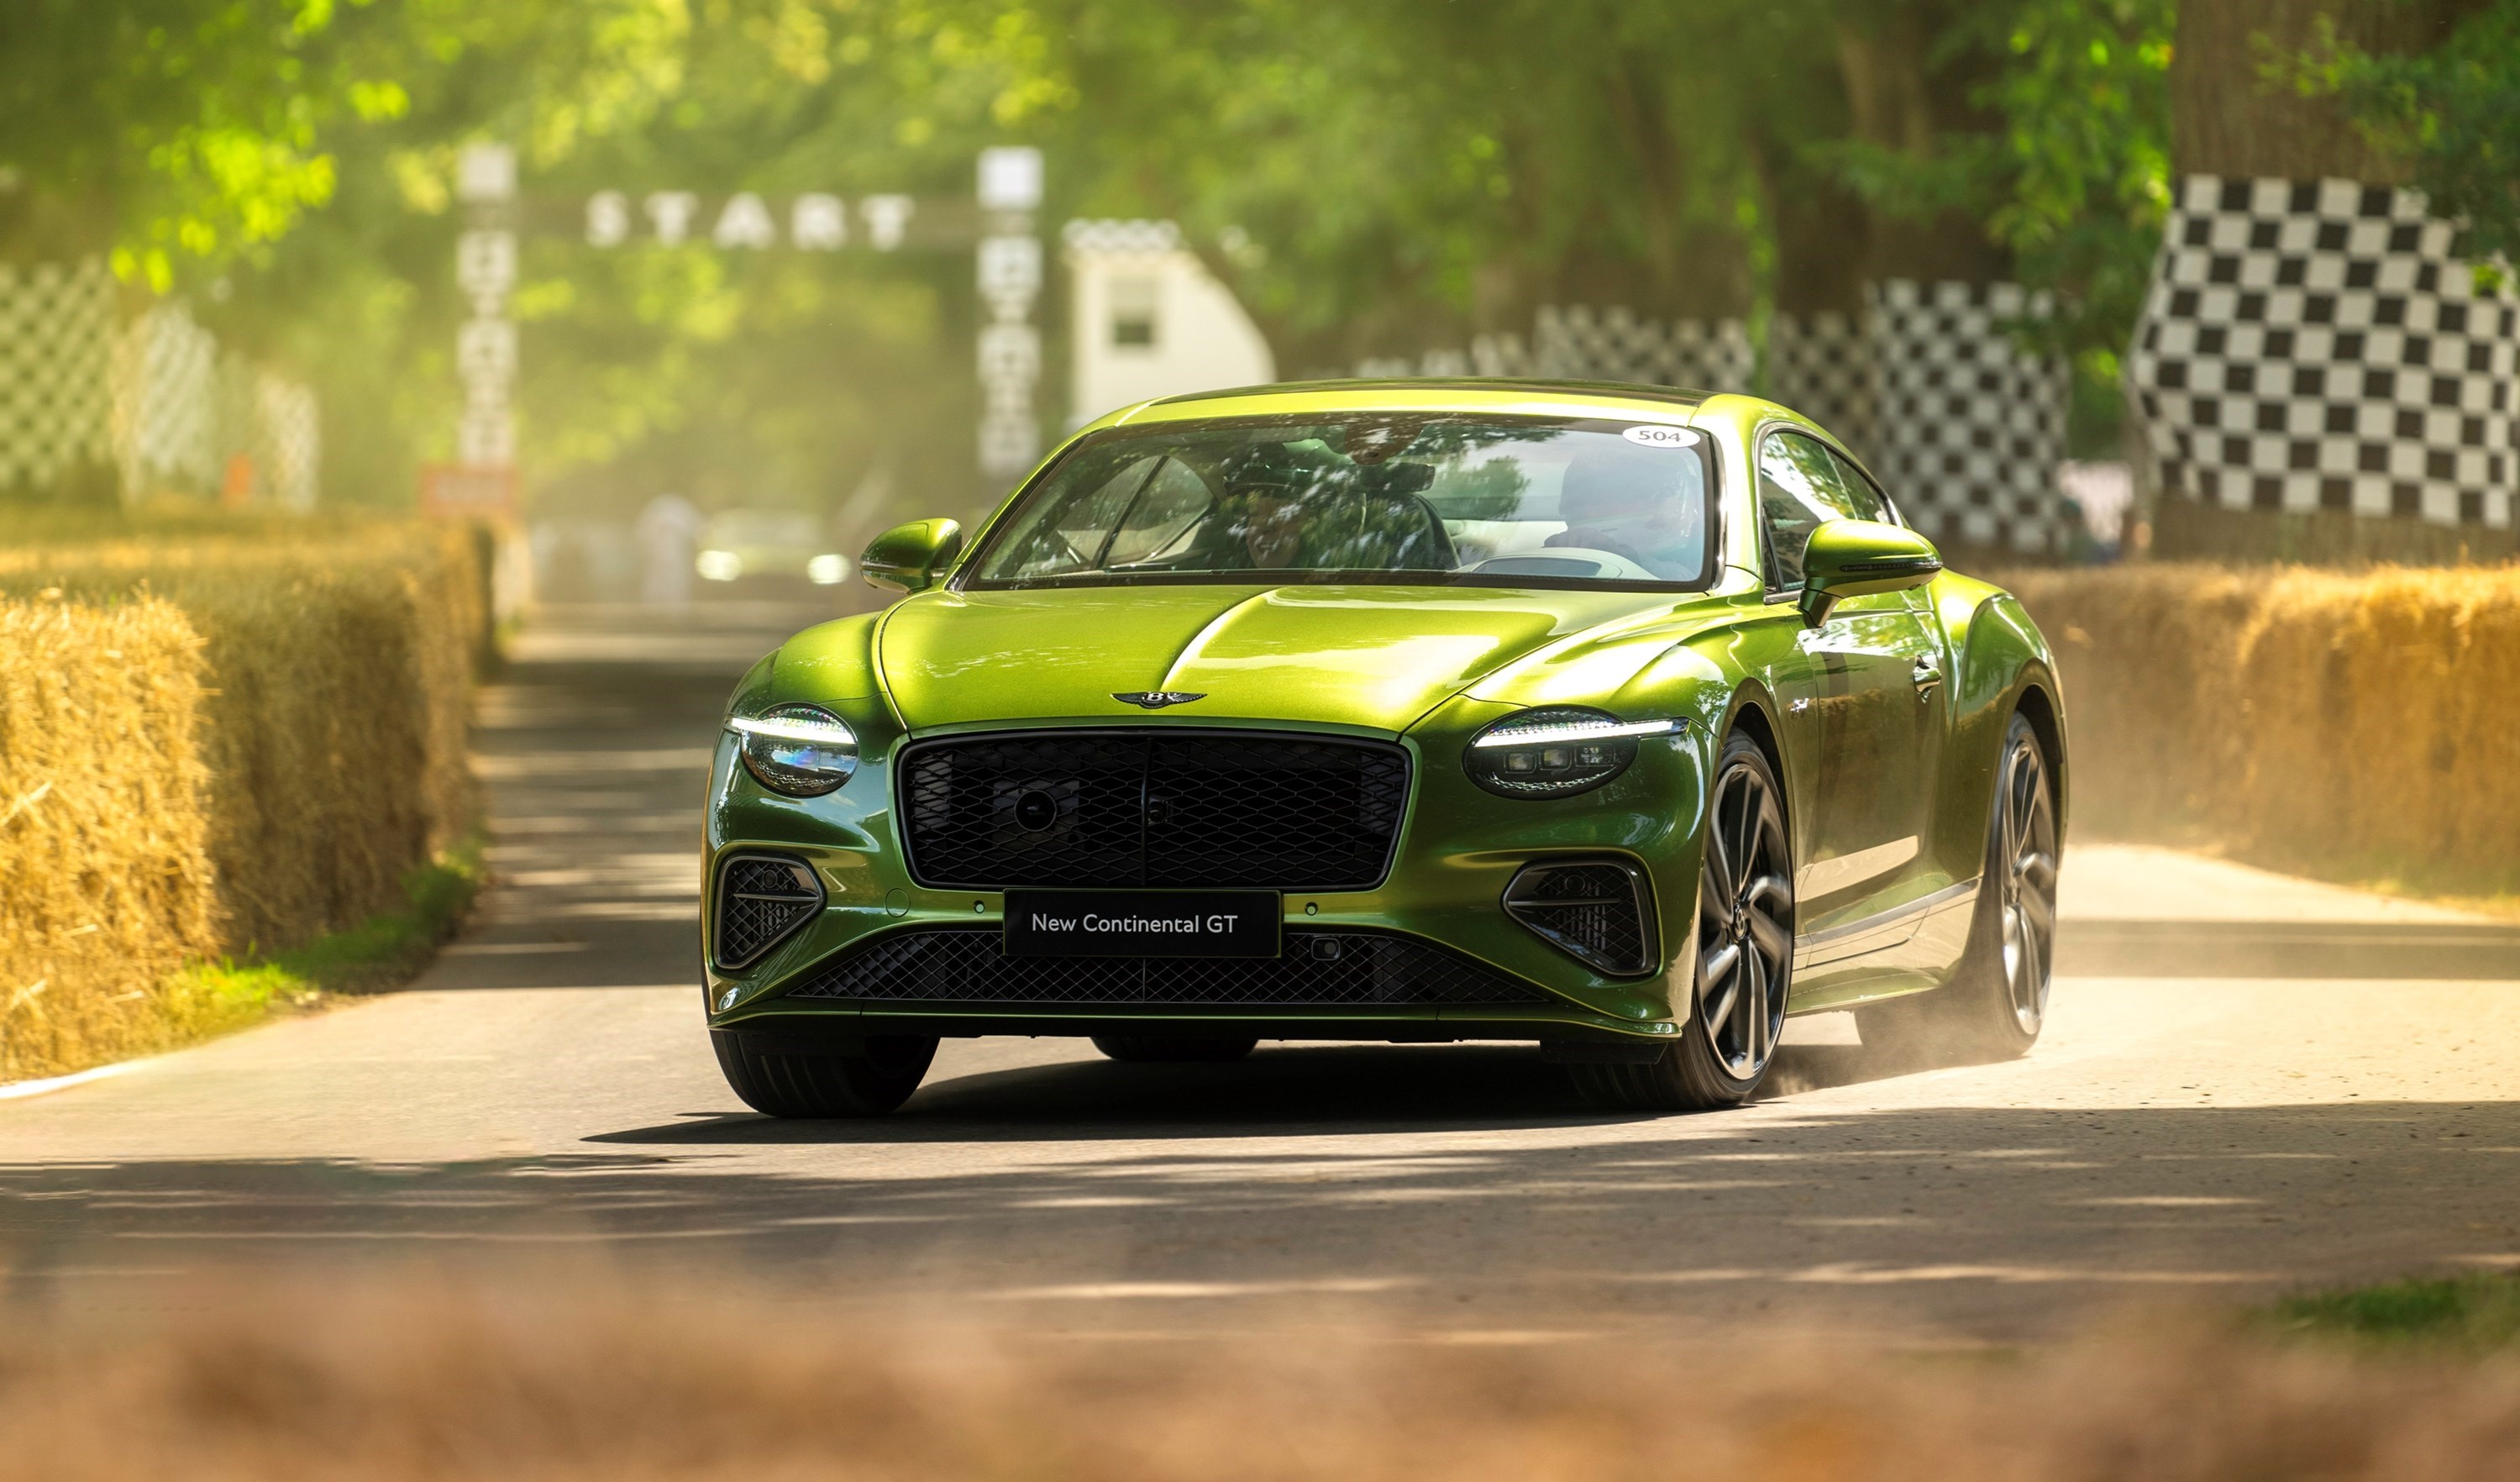 The new Continental GT Speed debuts at Goodwood